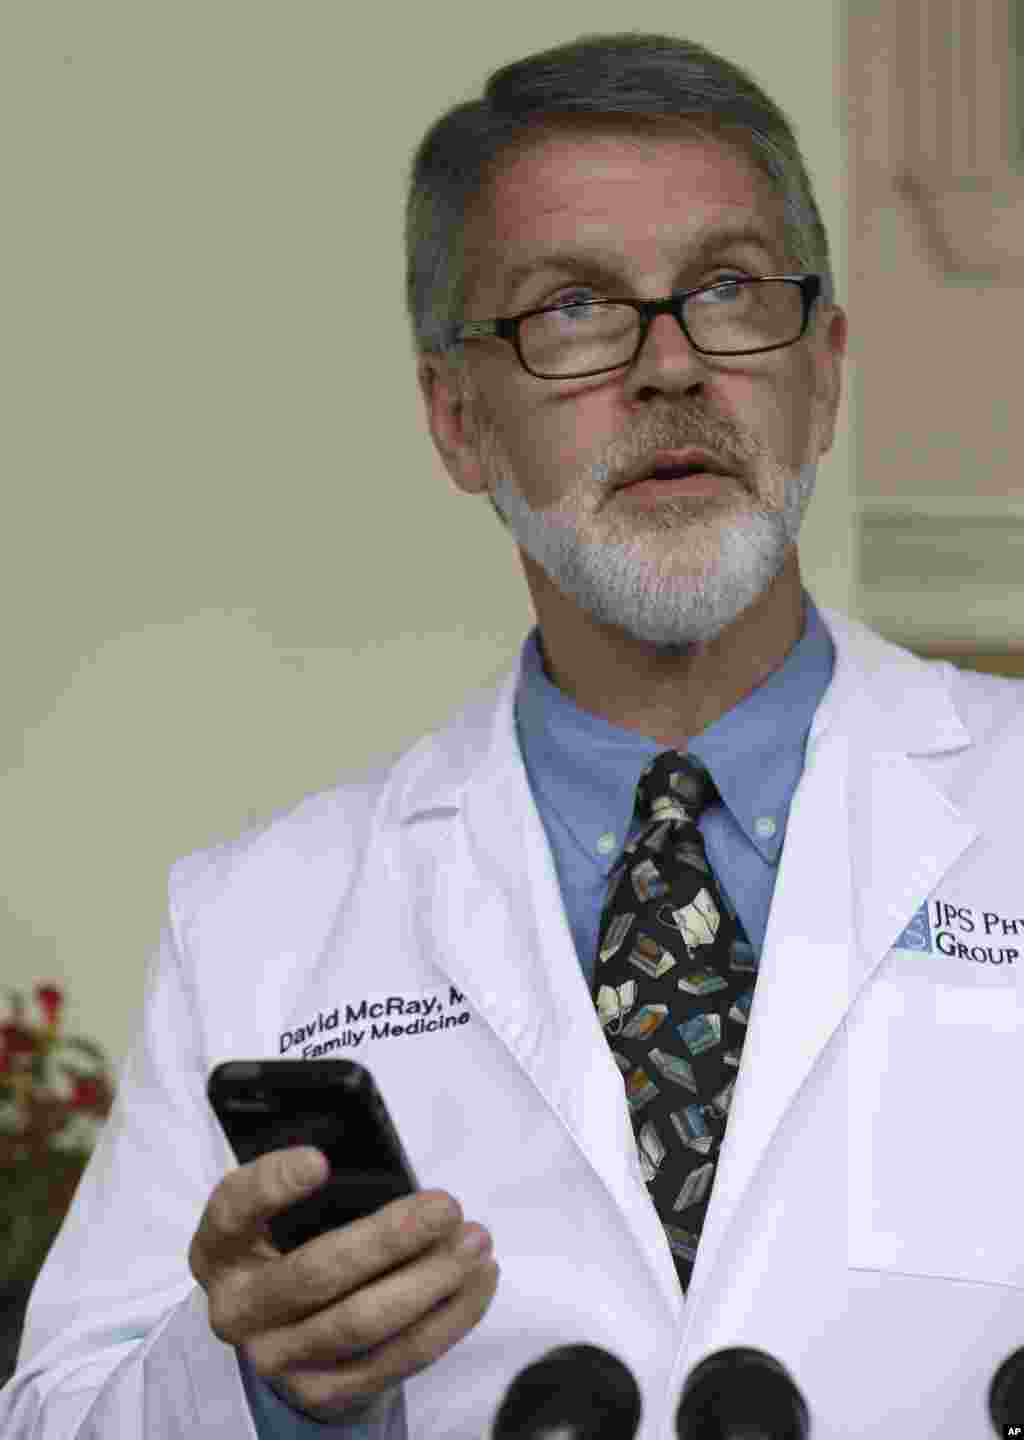 Dr. David Mcray reads a recent message from his friend and colleague, Dr. Kent Brantly, during a news conference in Fort Worth, Texas. Brantly is one of two American aid workers who have tested positive for the Ebola virus while working to combat a deadly outbreak at a Liberian hospital, July 28, 2014.